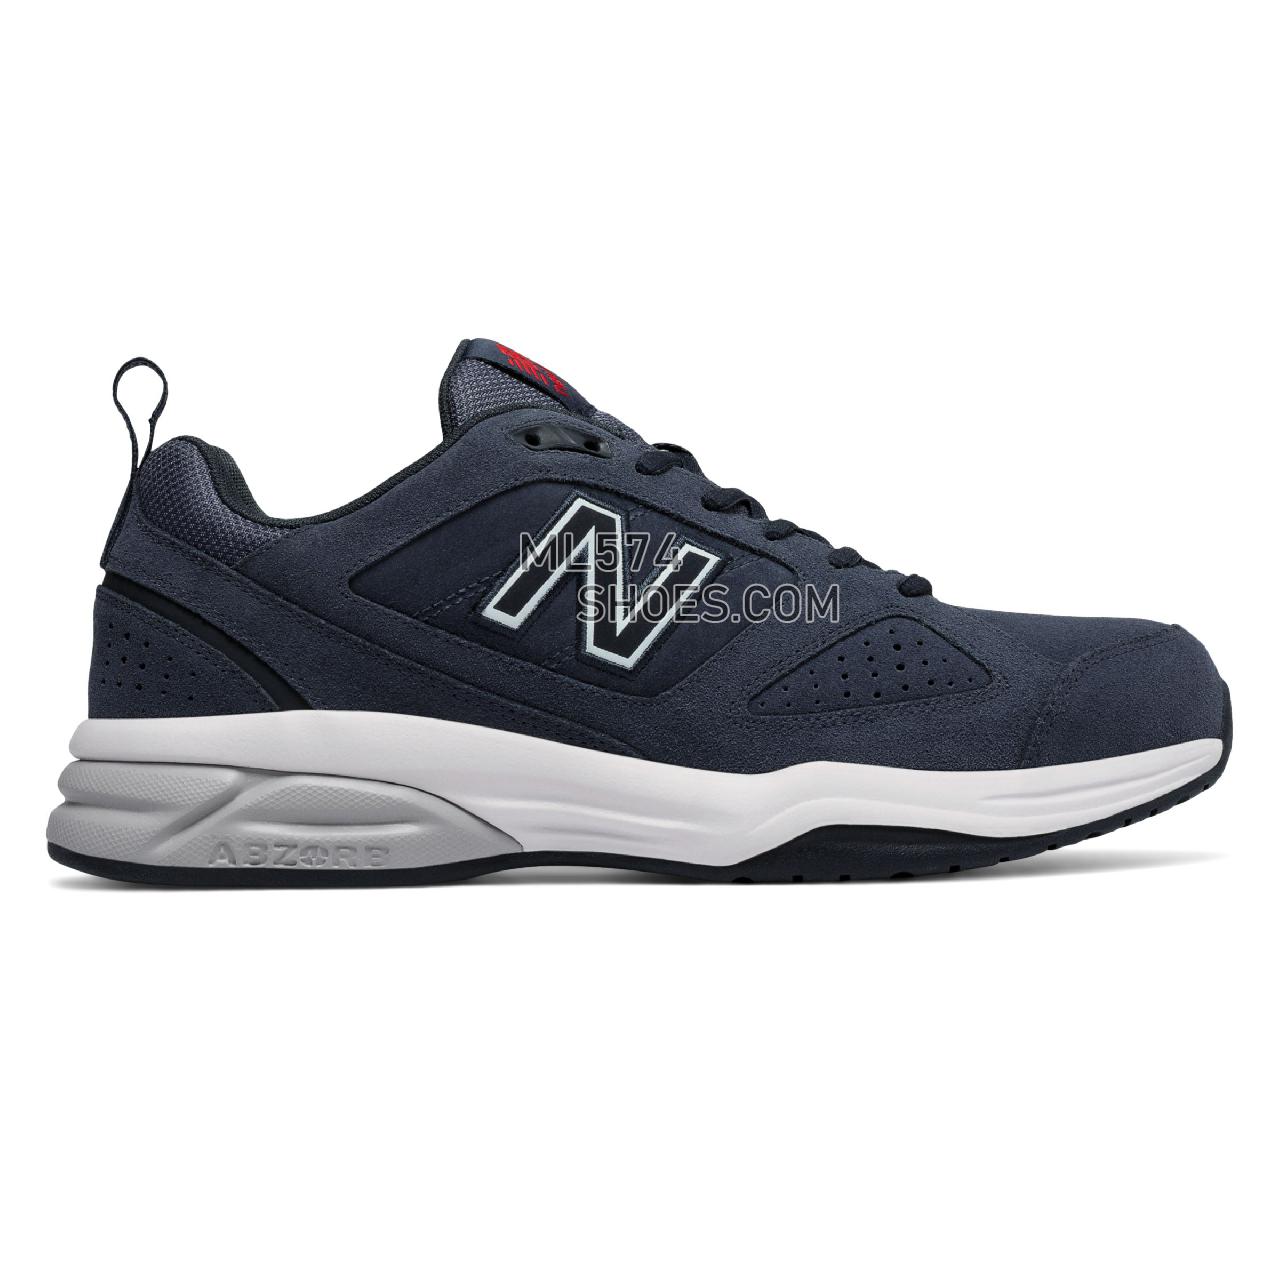 New Balance New Balance 623v3 Suede Trainer - Men's 623 - X-training Charcoal - MX623CH3